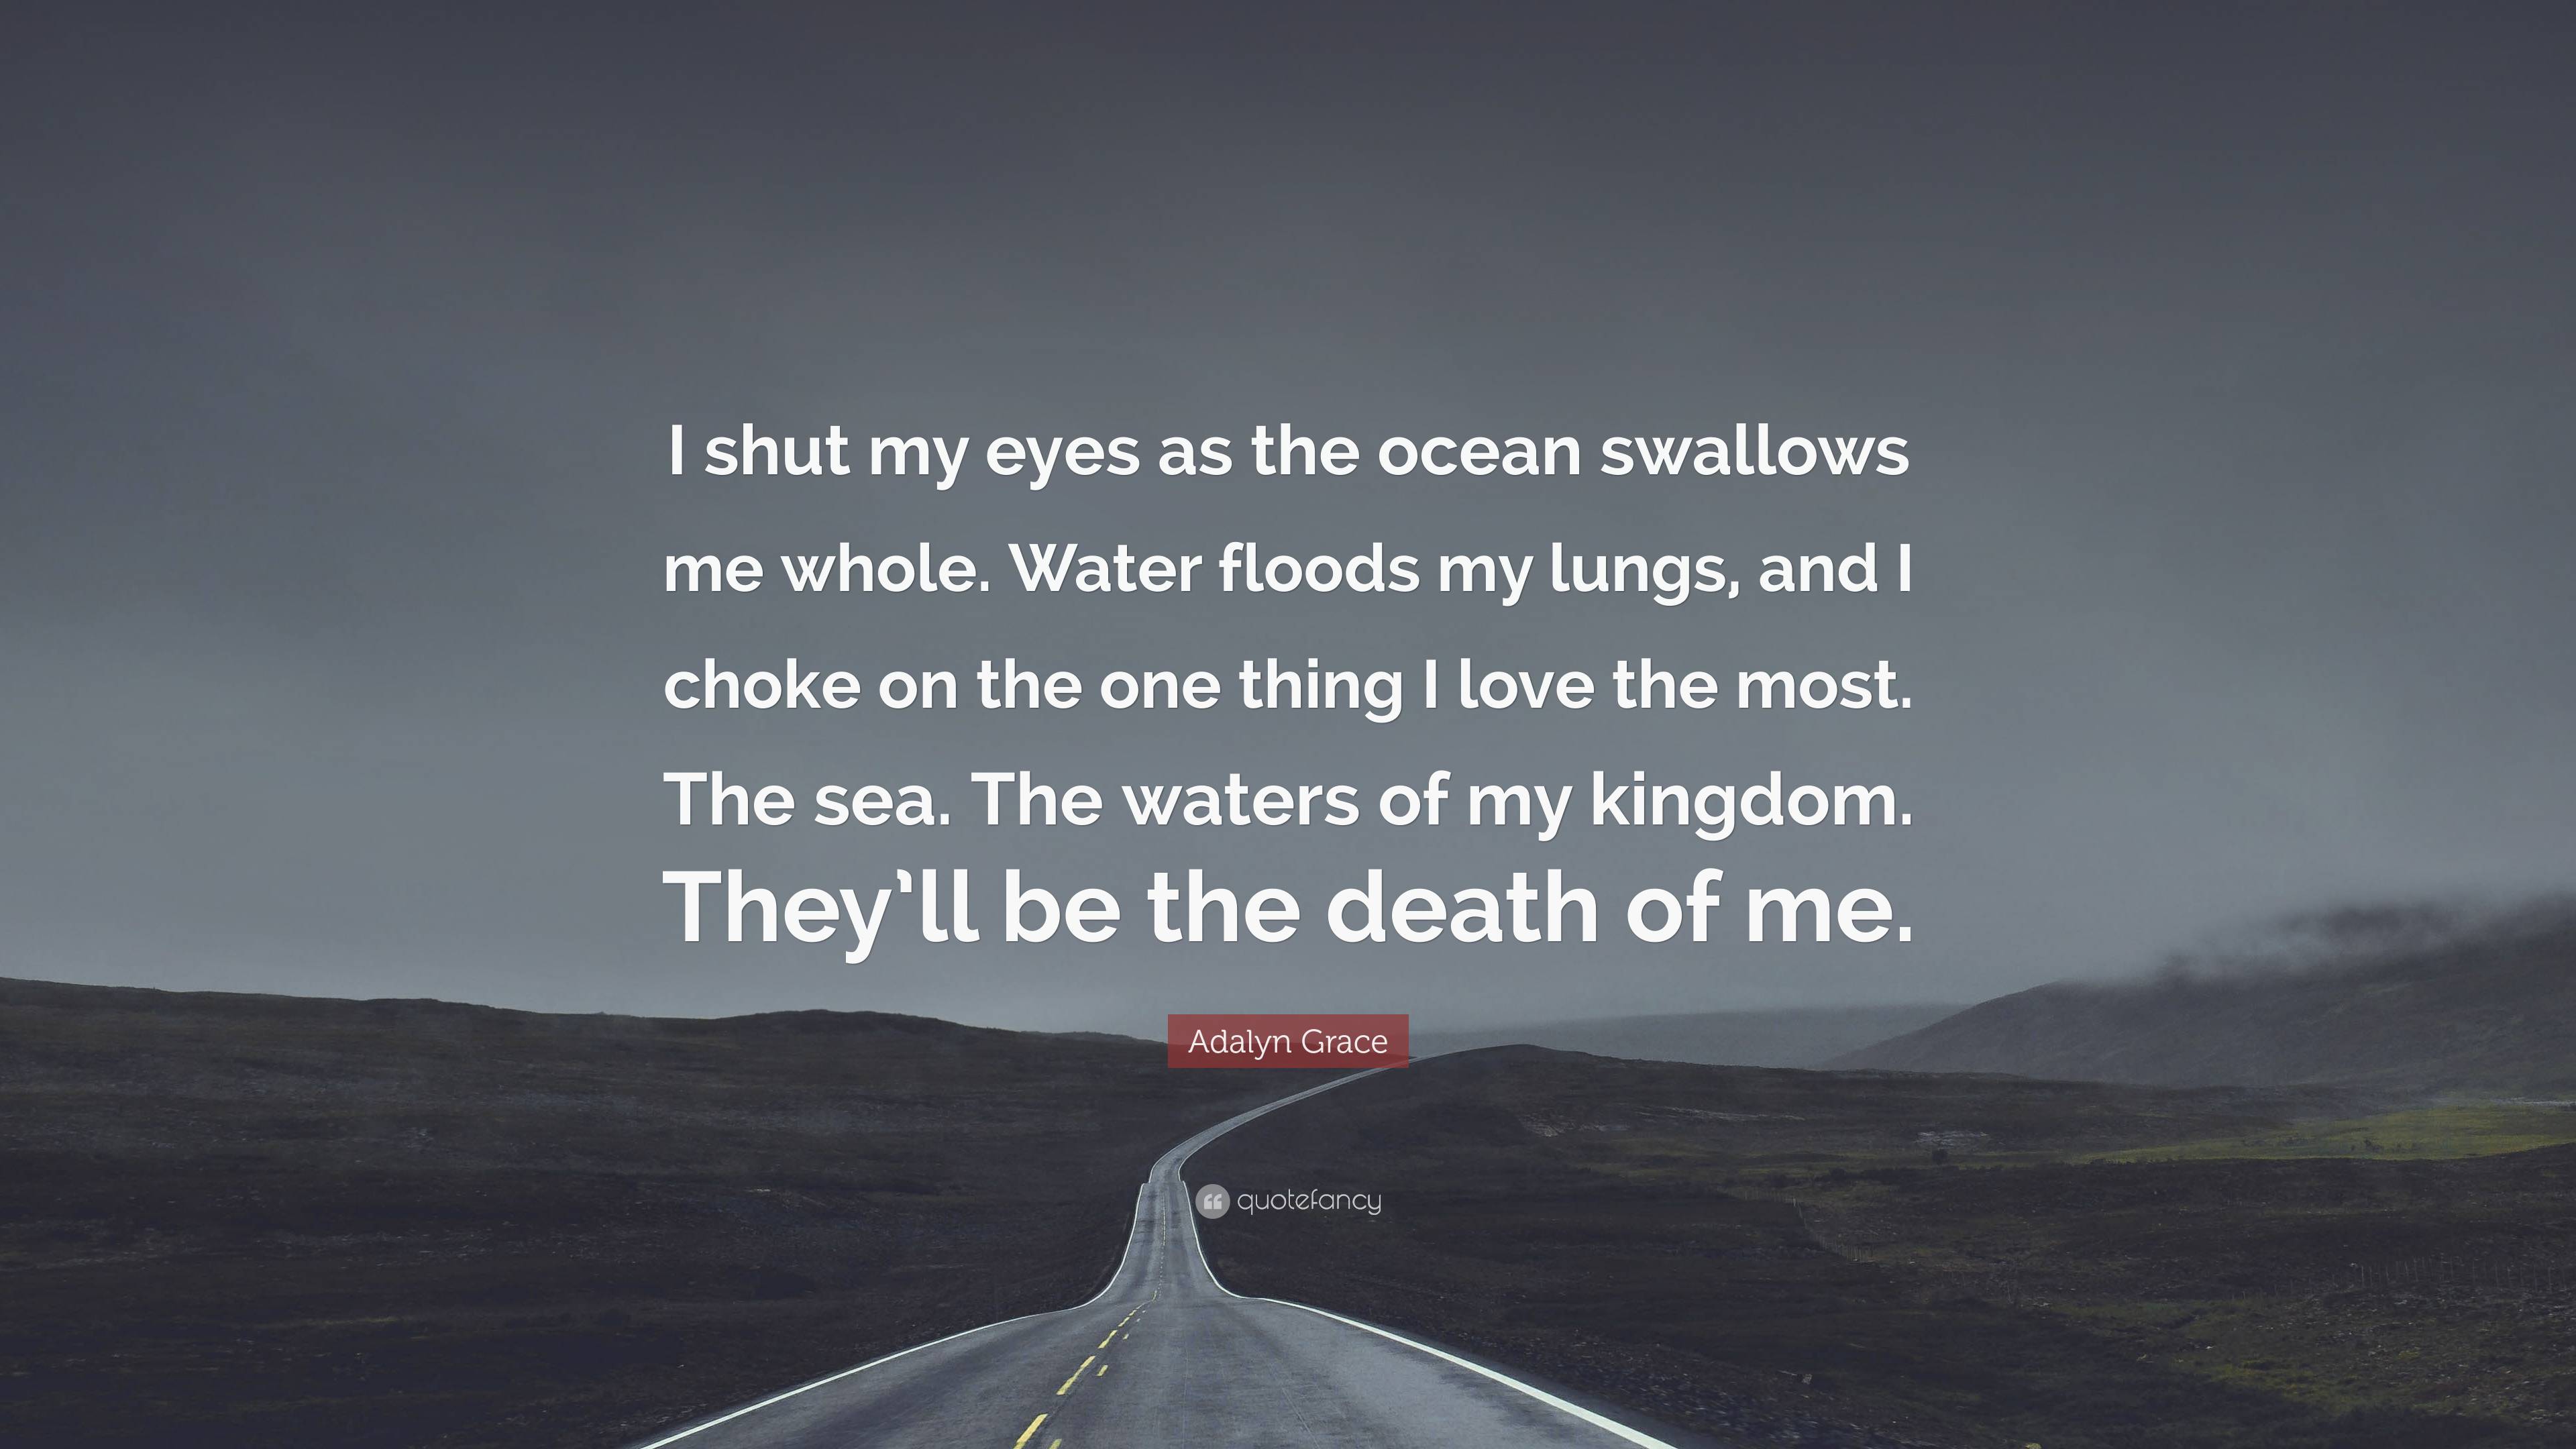 Adalyn Grace Quote: “I shut my eyes as the ocean swallows me whole